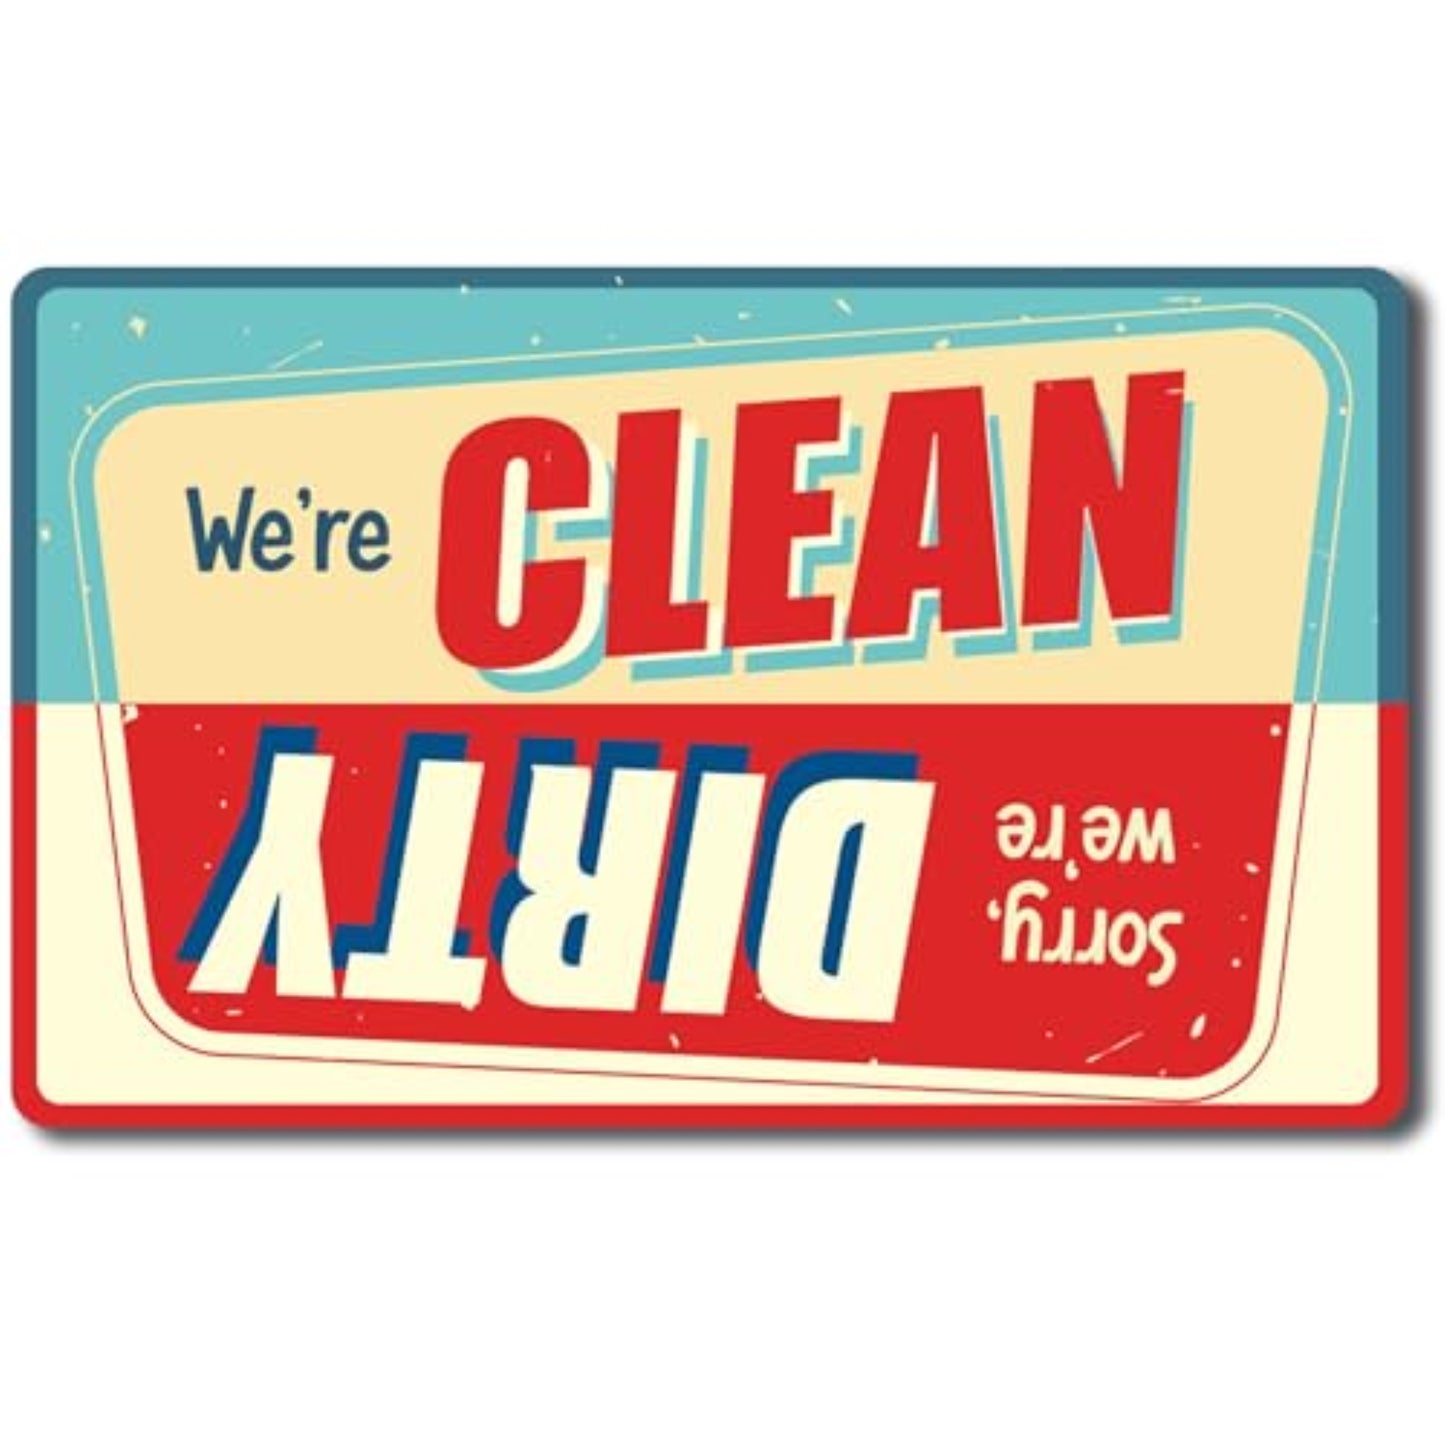 Magnet Me Up Retro Sorry We're Dirty or We're Clean Dishwasher Indicator Magnet Decal, 6x4 Inch, Heavy Duty Waterproof Kitchen Safe Magnet, Red and Blue